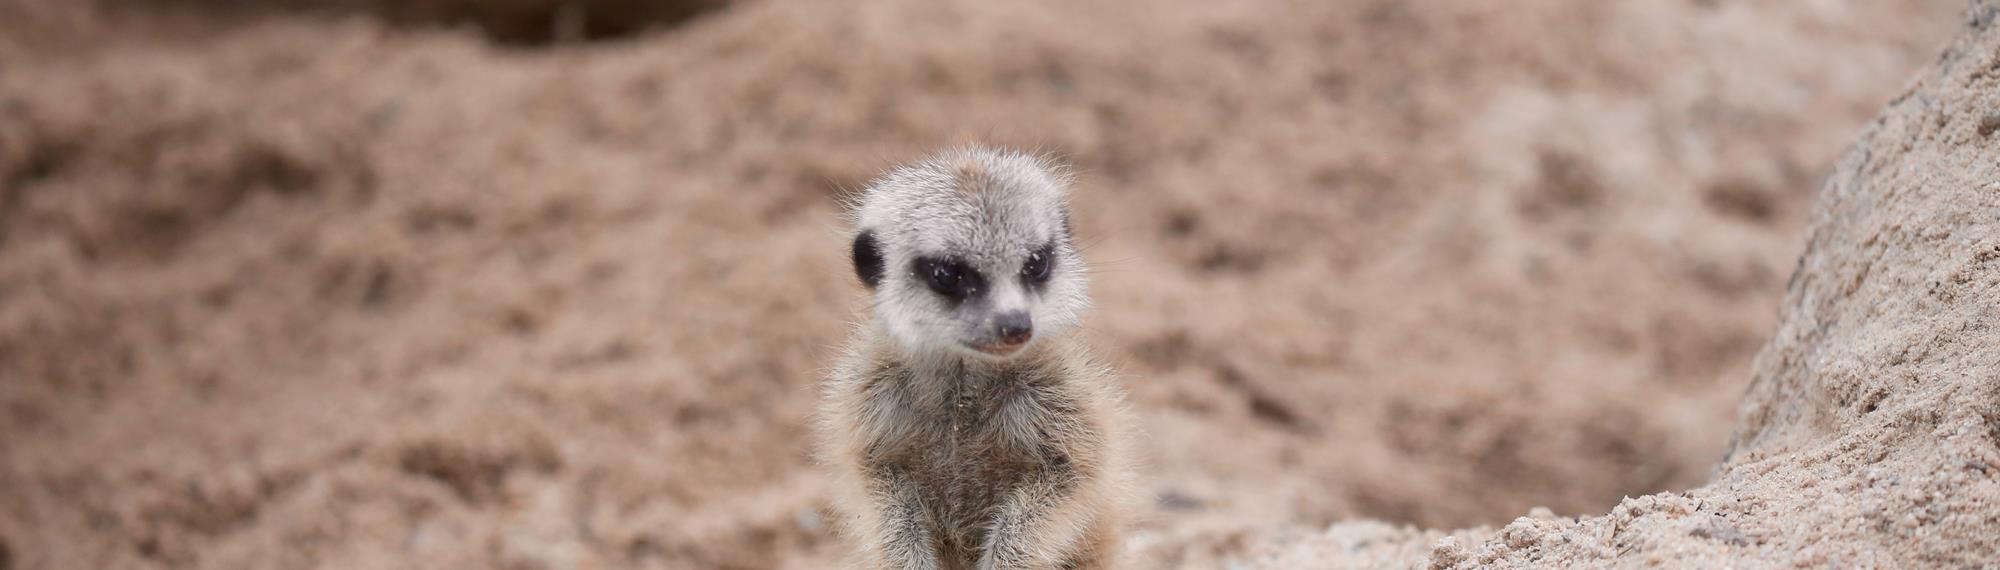 Super cute baby meerkat standing in the sand on its hind legs. Baby meerkat is light brown with black patches around eyes and ears and is looking down.